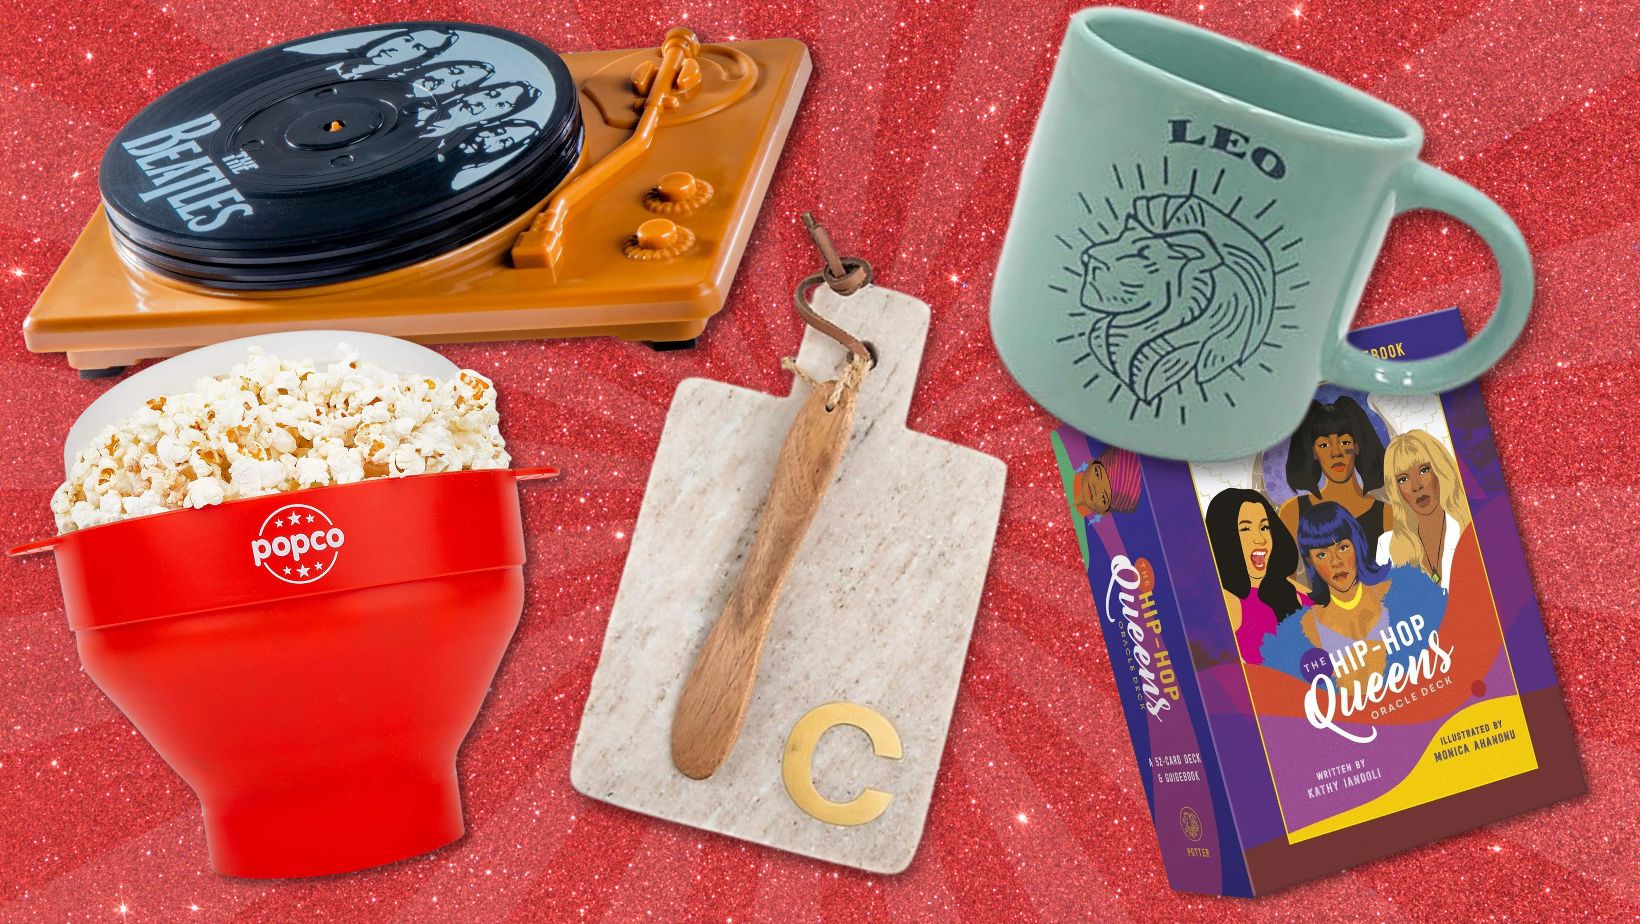 Secret Santa gift ideas to give your coworker on Christmas  Times of India